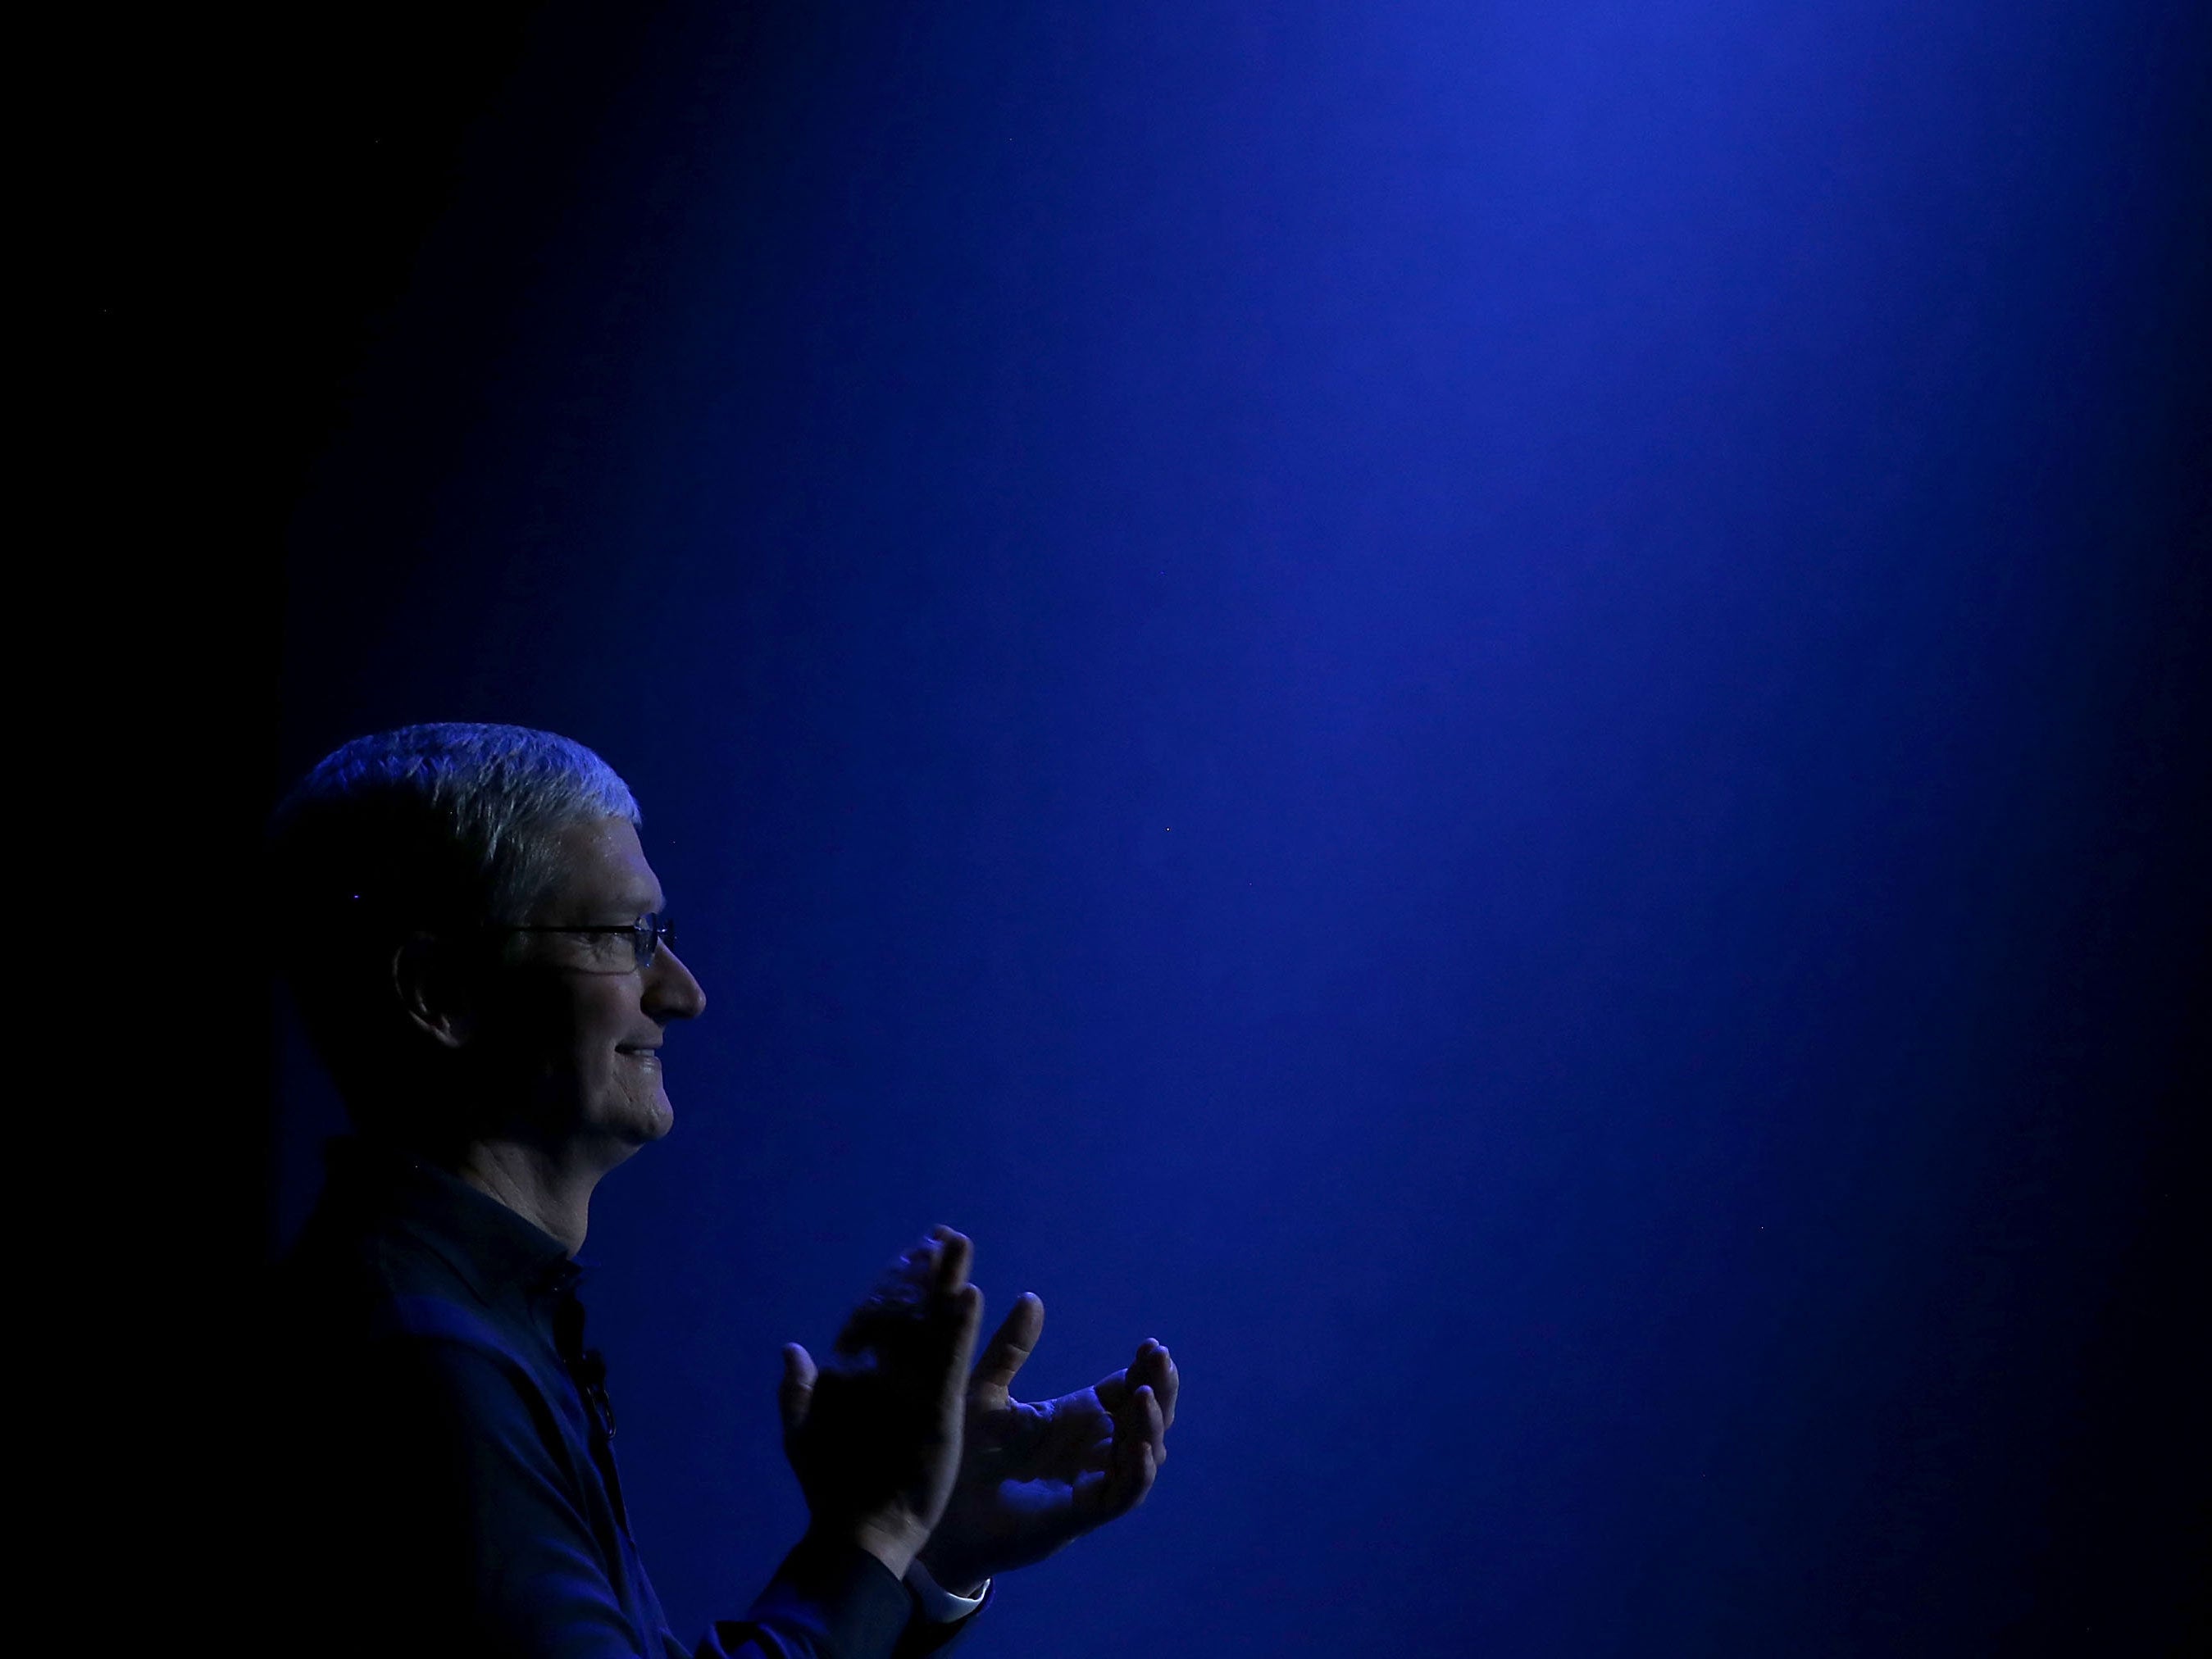 Apple CEO Tim Cook looks on as he delivers the keynote address during Apple WWDC on June 8, 2015 in San Francisco, California